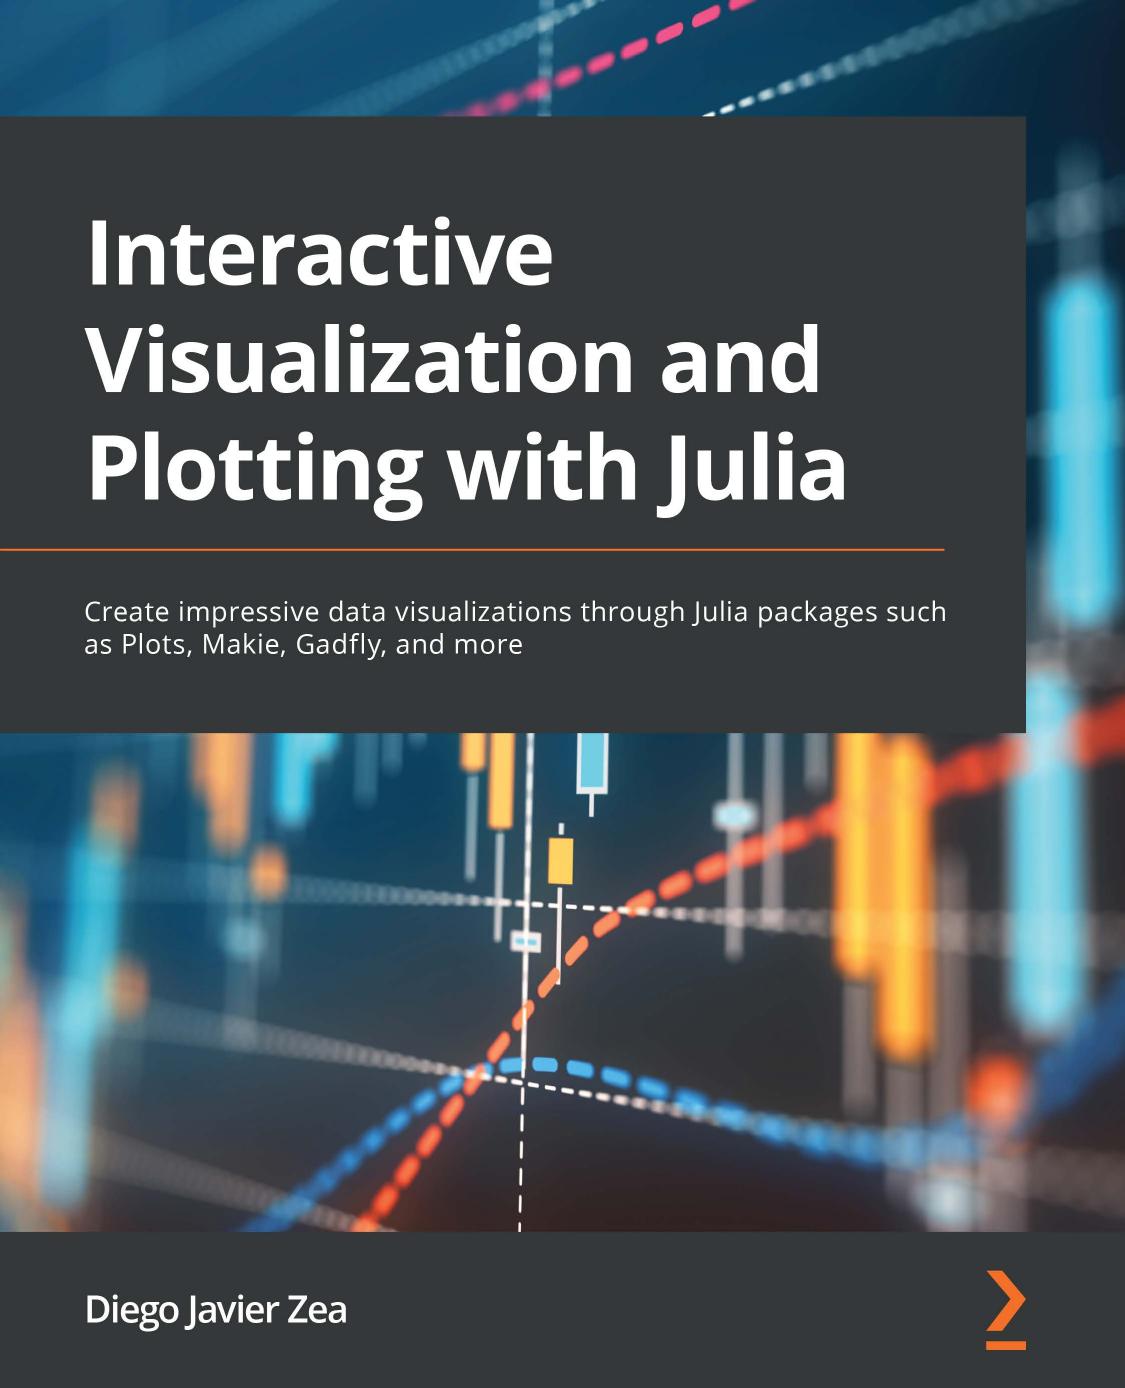 Interactive Visualization and Plotting with Julia by Diego Javier Zea